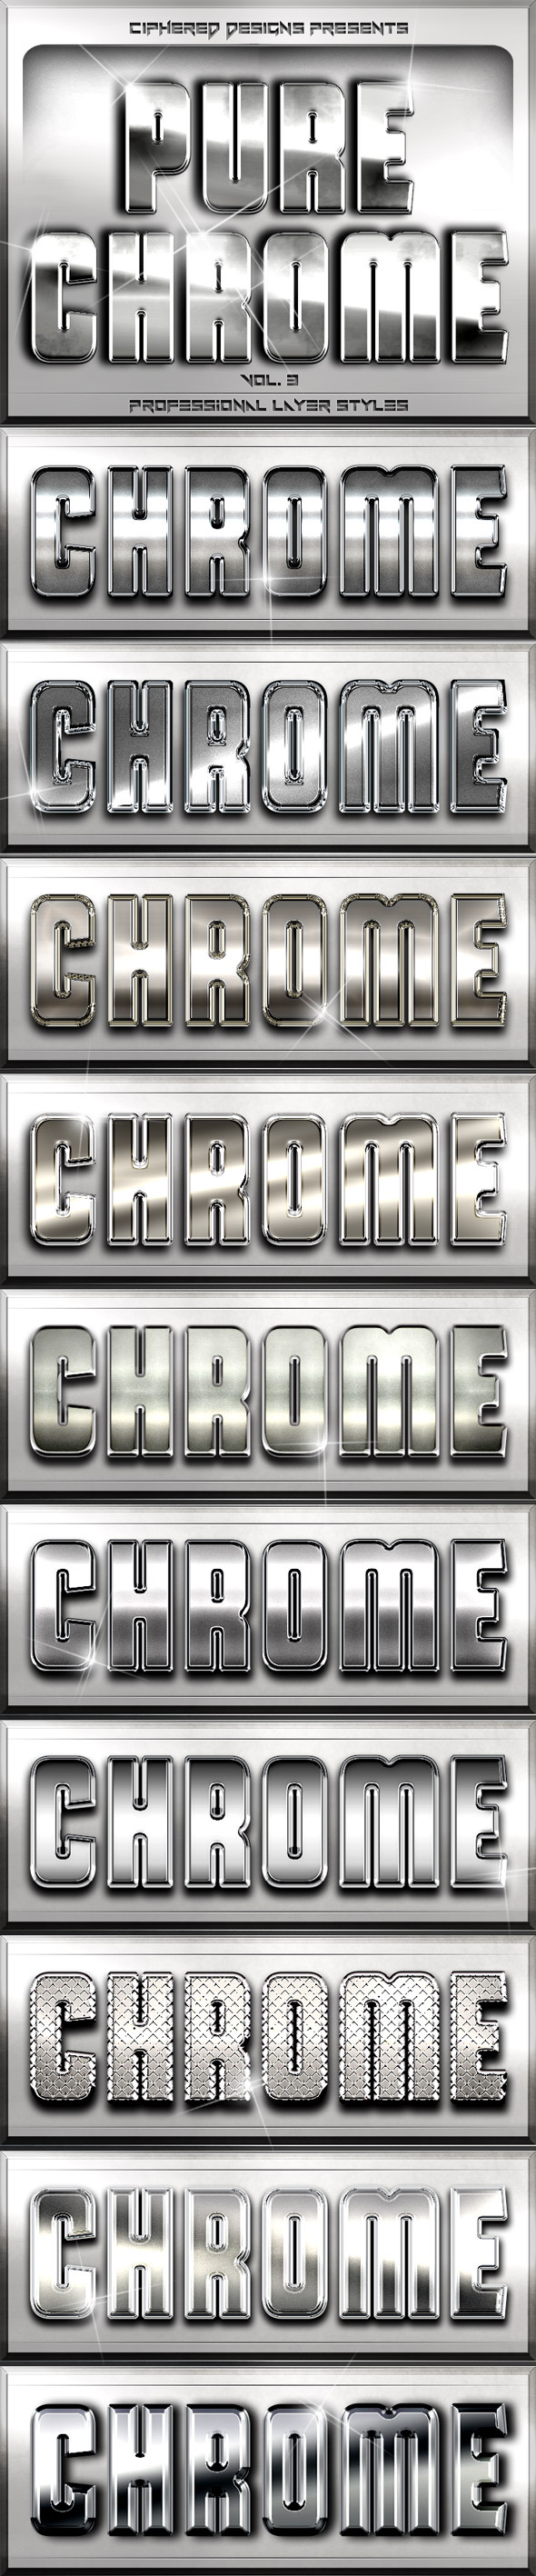 Pure Chrome 3 - Professional Layer Styles